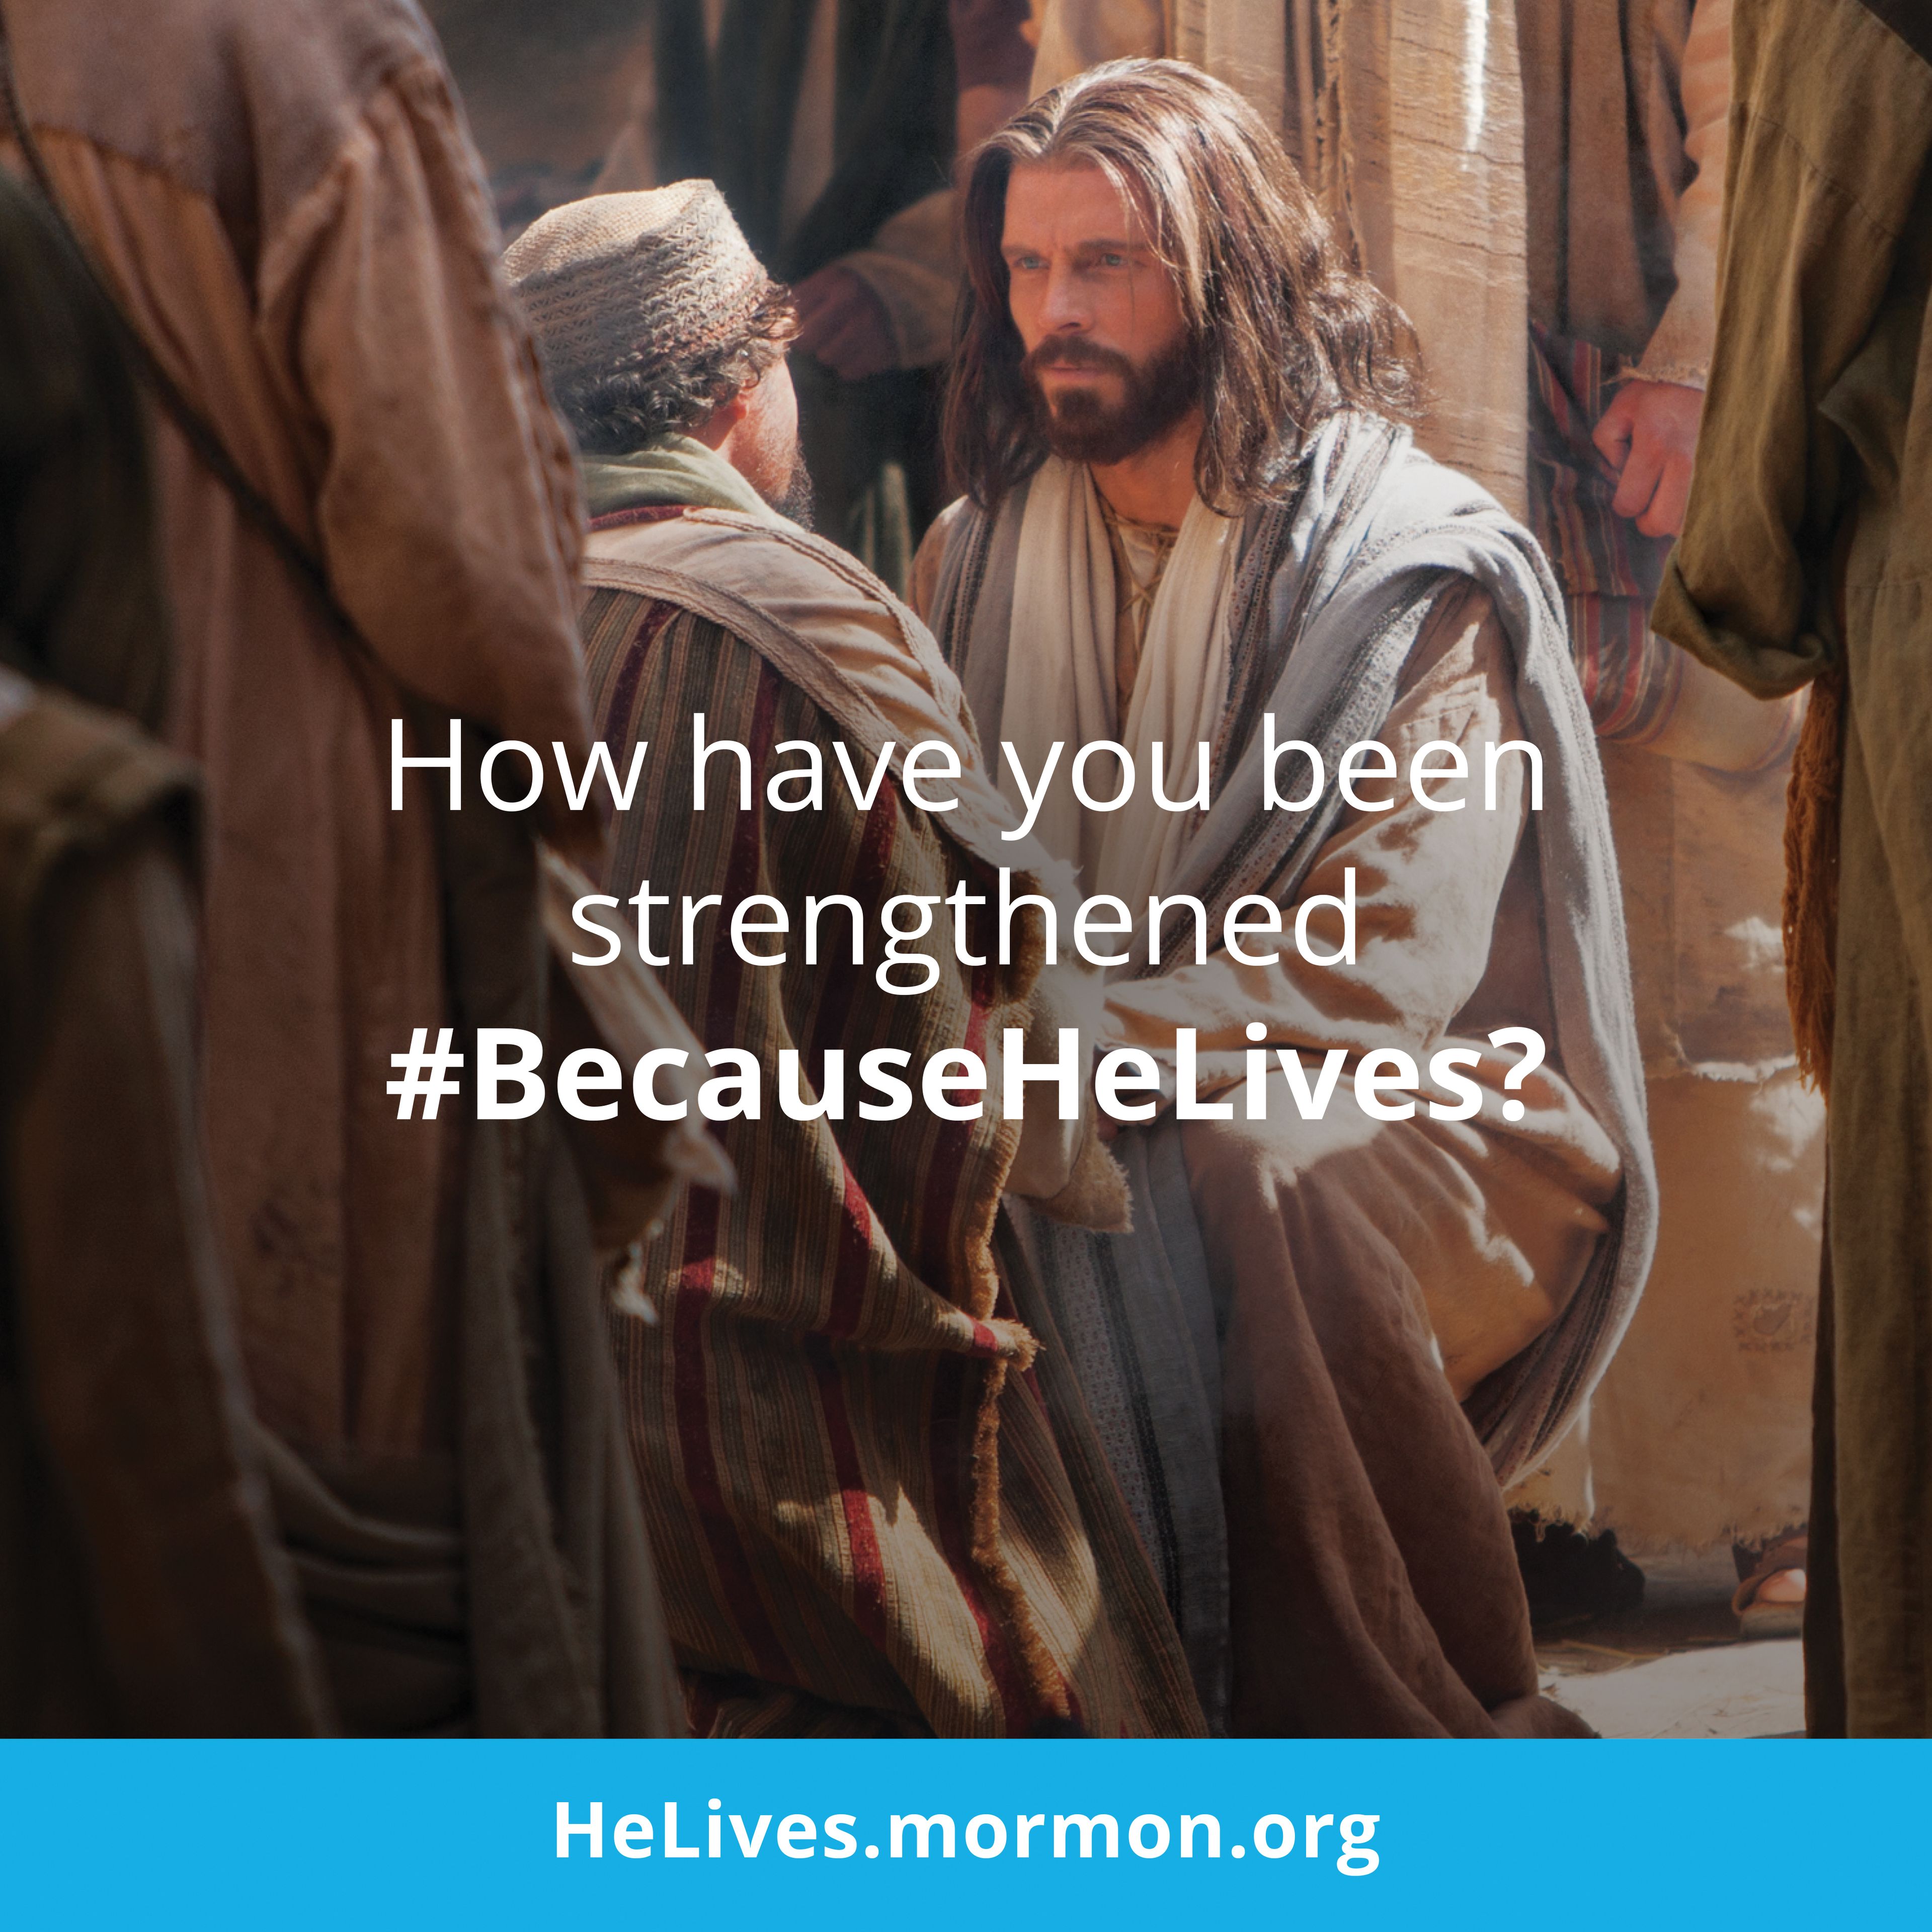 How have you been strengthened #BecauseHeLives? HeLives.mormon.org